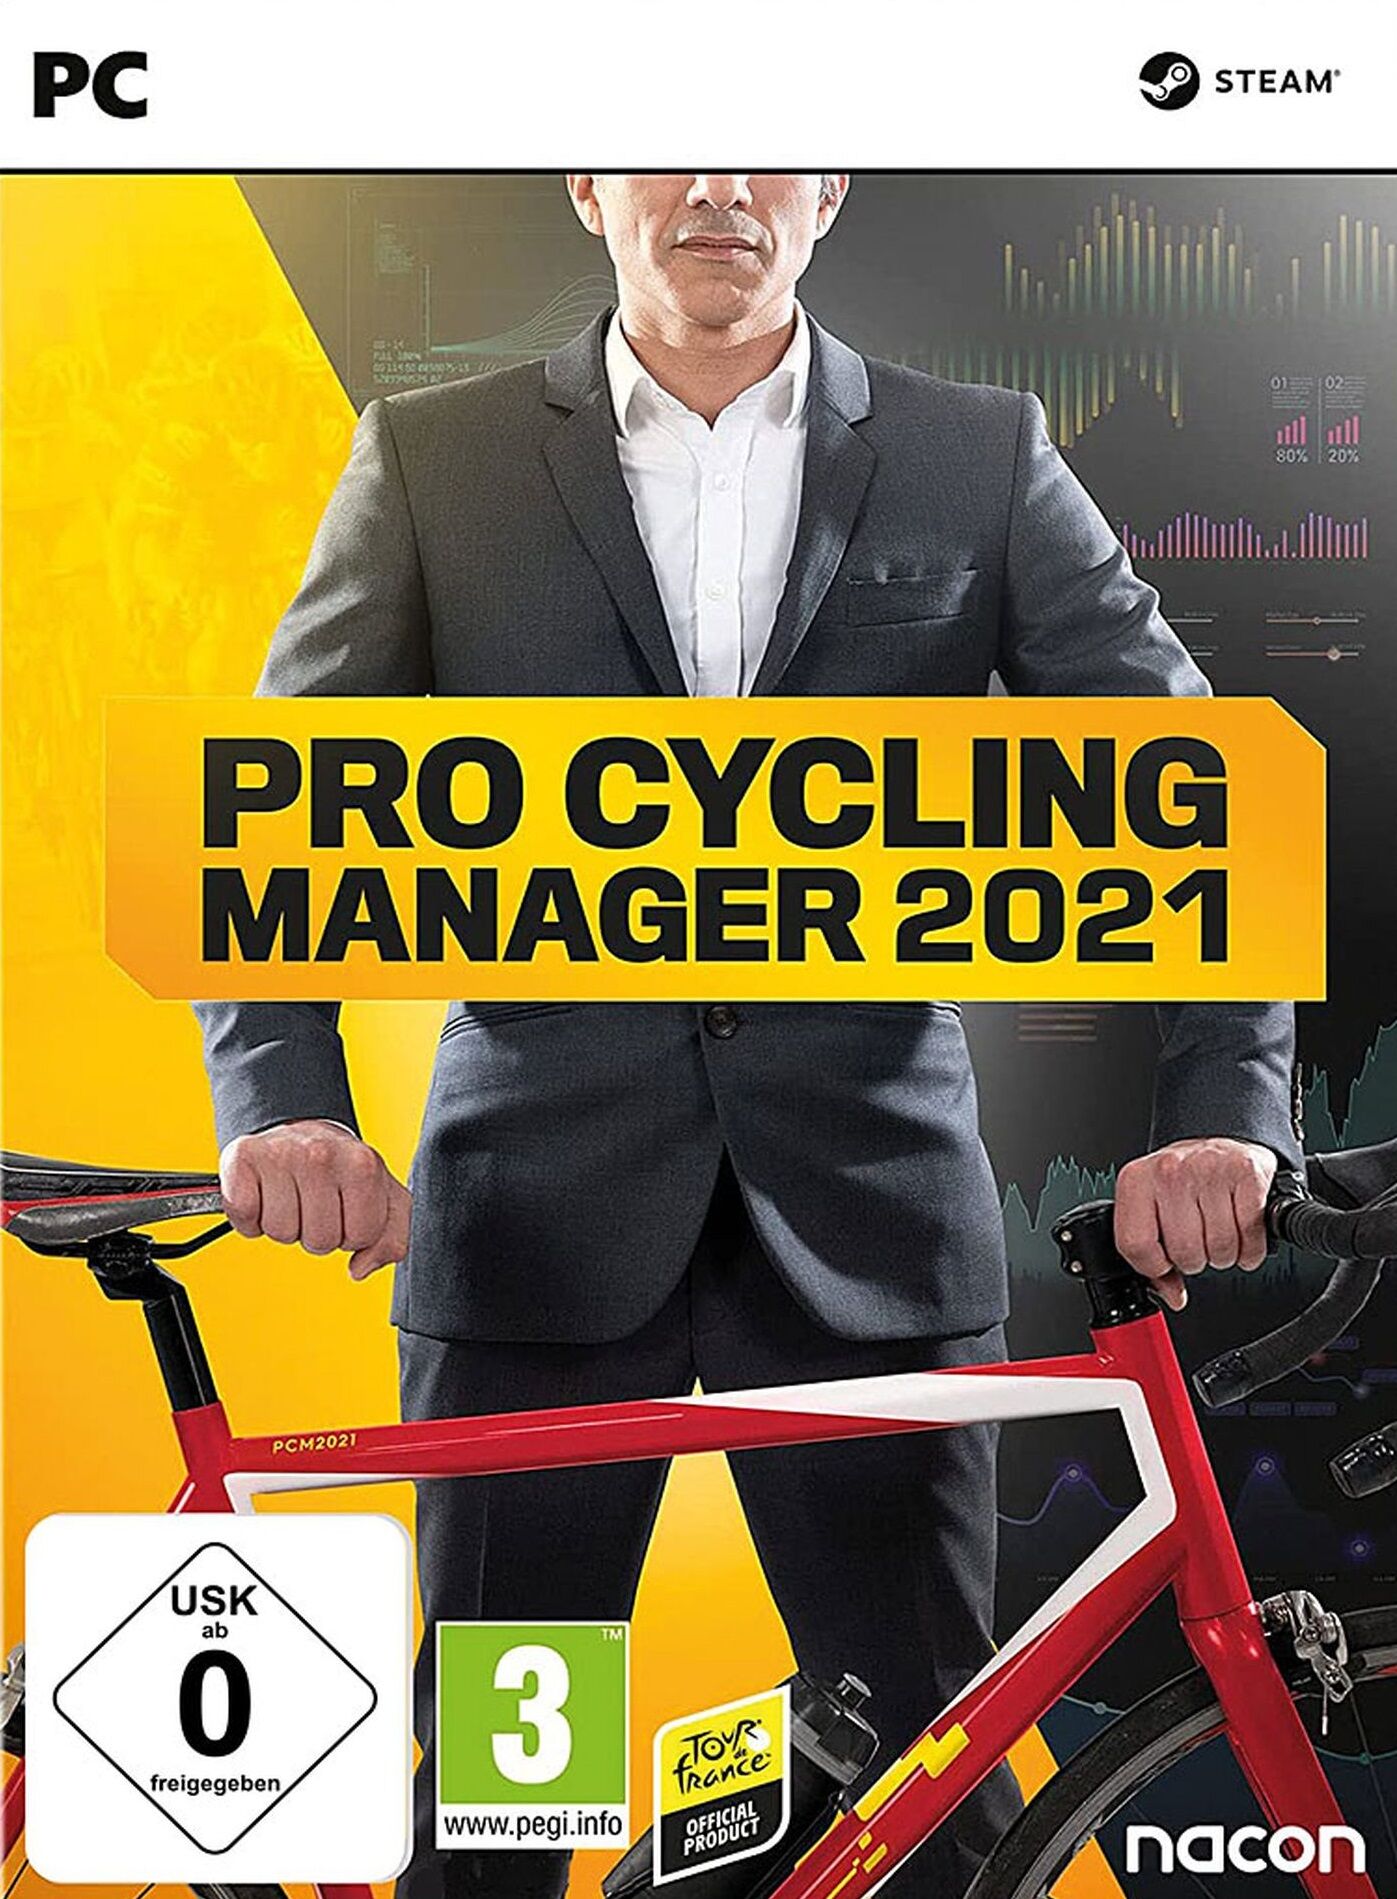 Nacon - Pro Cycling Manager 2021 [PC] (D/F)